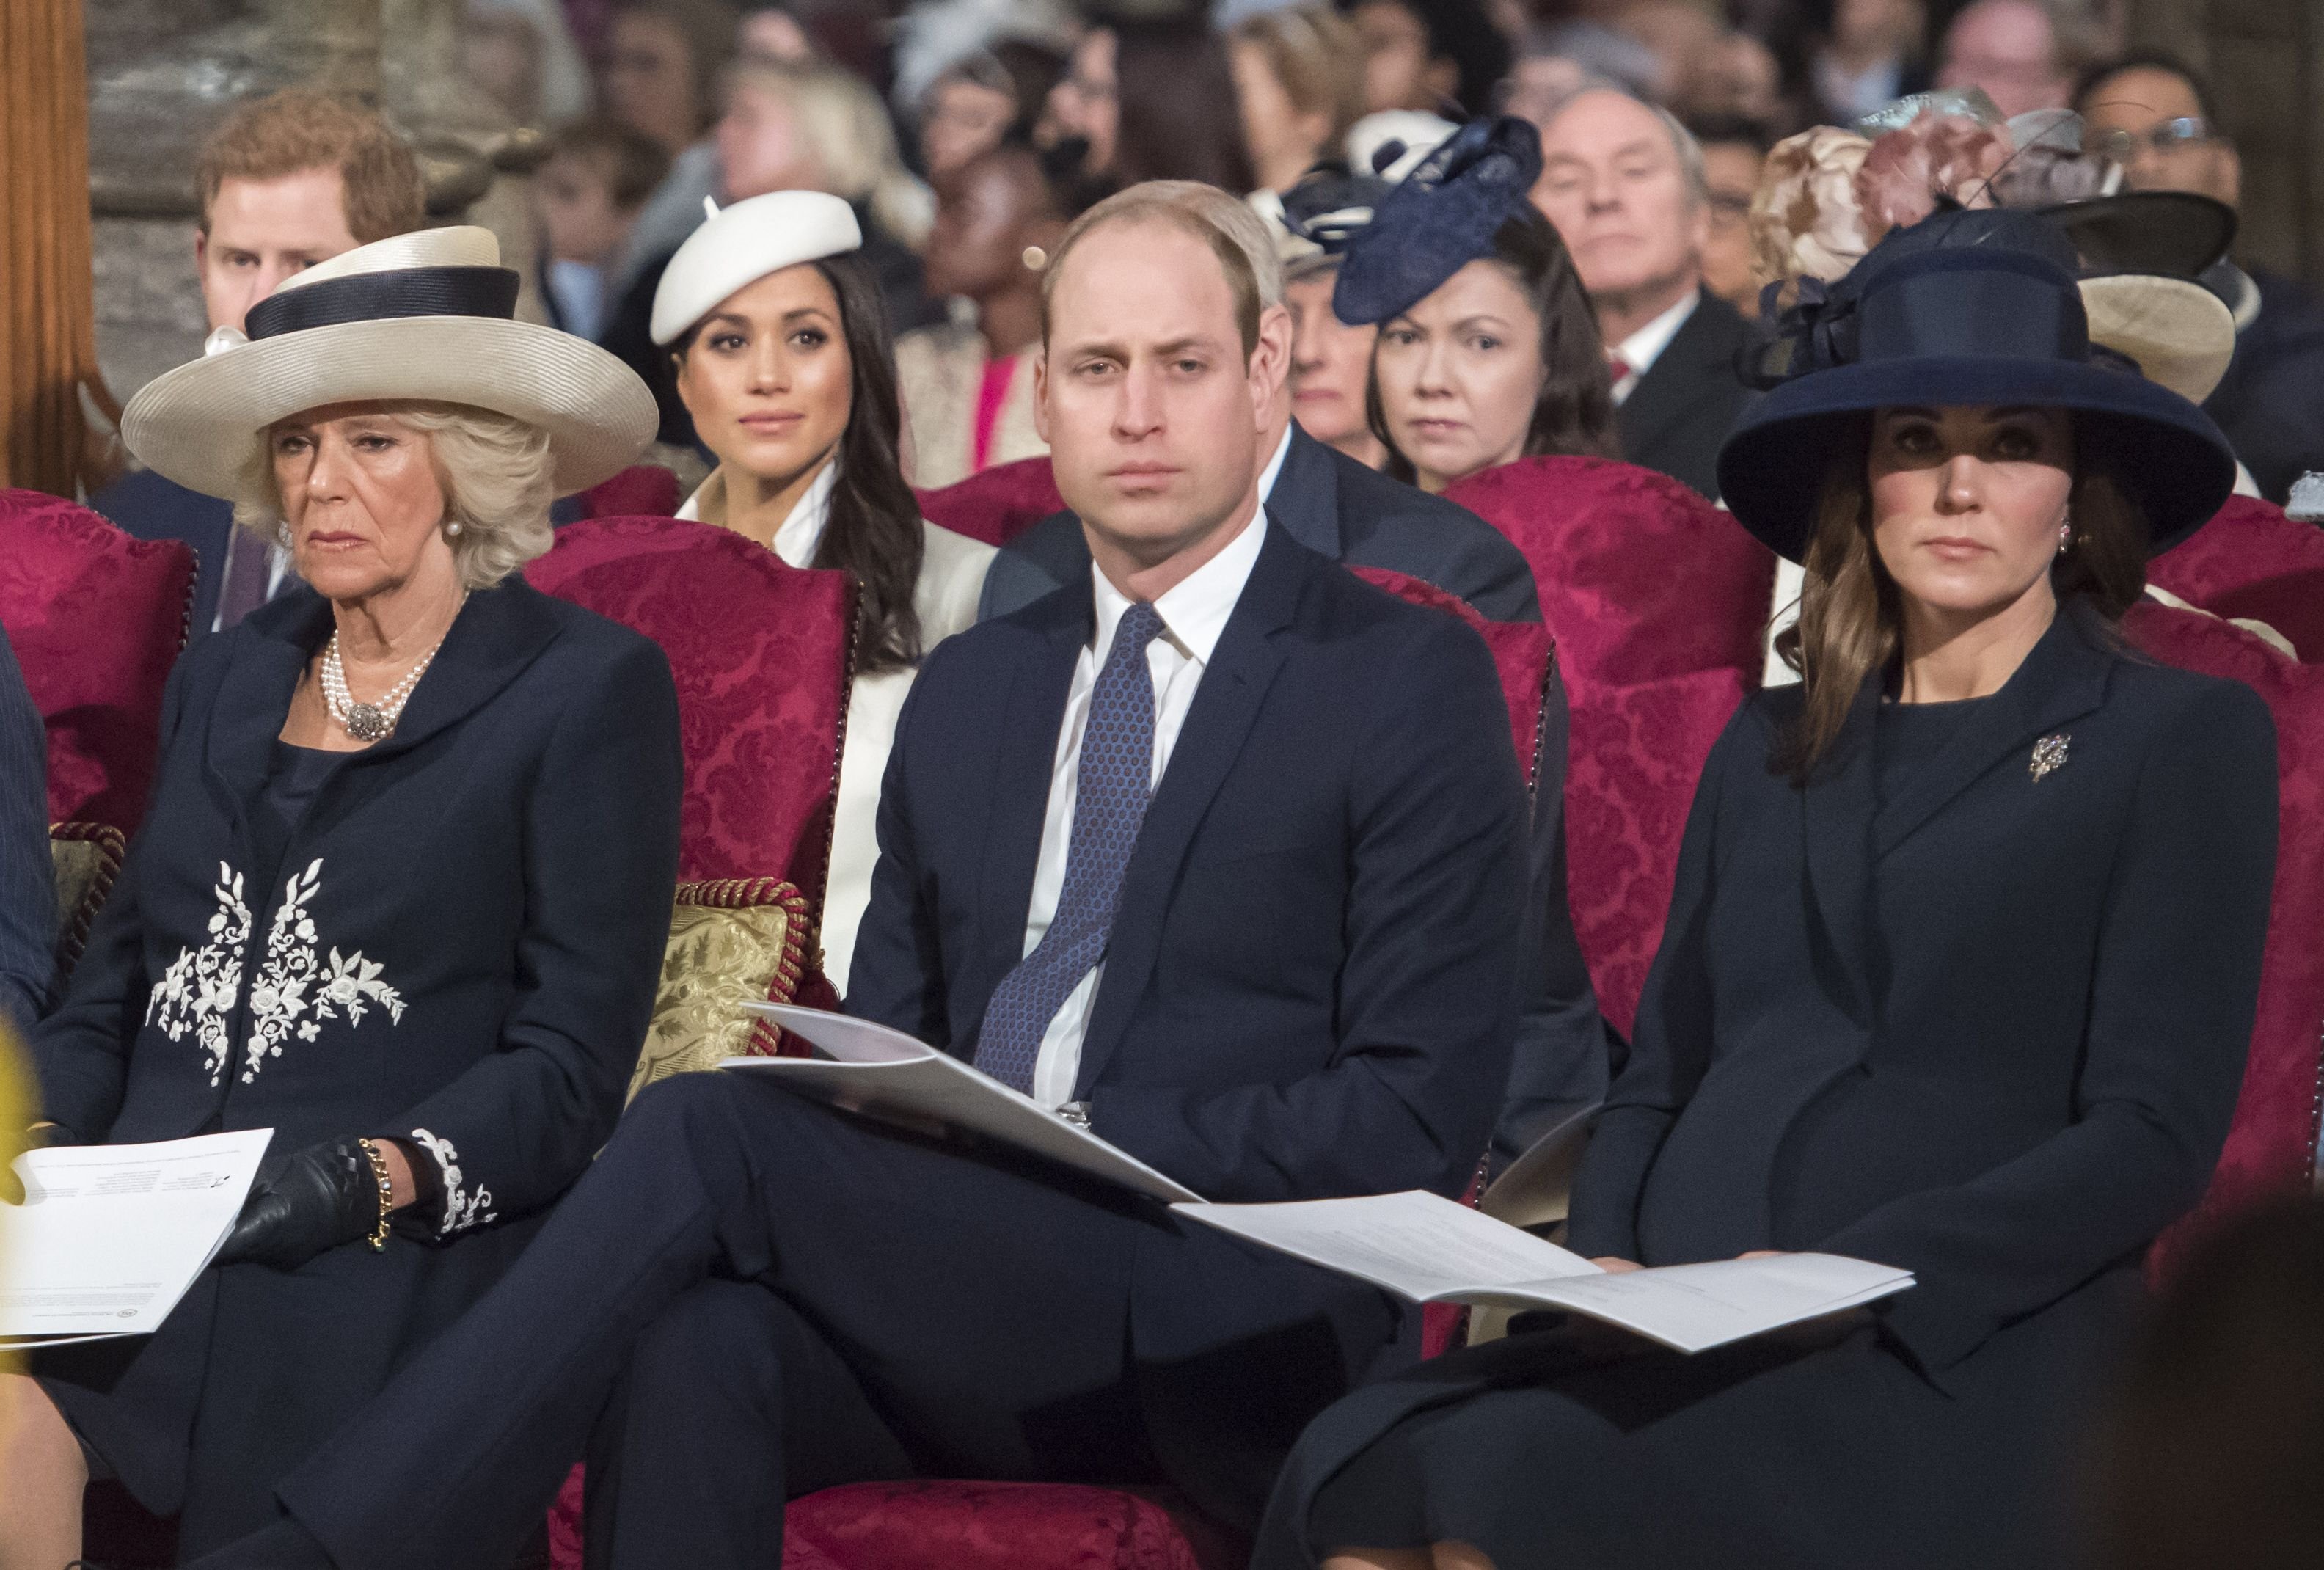 Camilla, Duchess of Cornwall, actress Meghan Markle, Prince William, Duke of Cambridge and Catherine, Duchess of Cambridge attending a Commonwealth Day Service at Westminster Abbey on March 12, 2018 in London. / Source: Getty Images